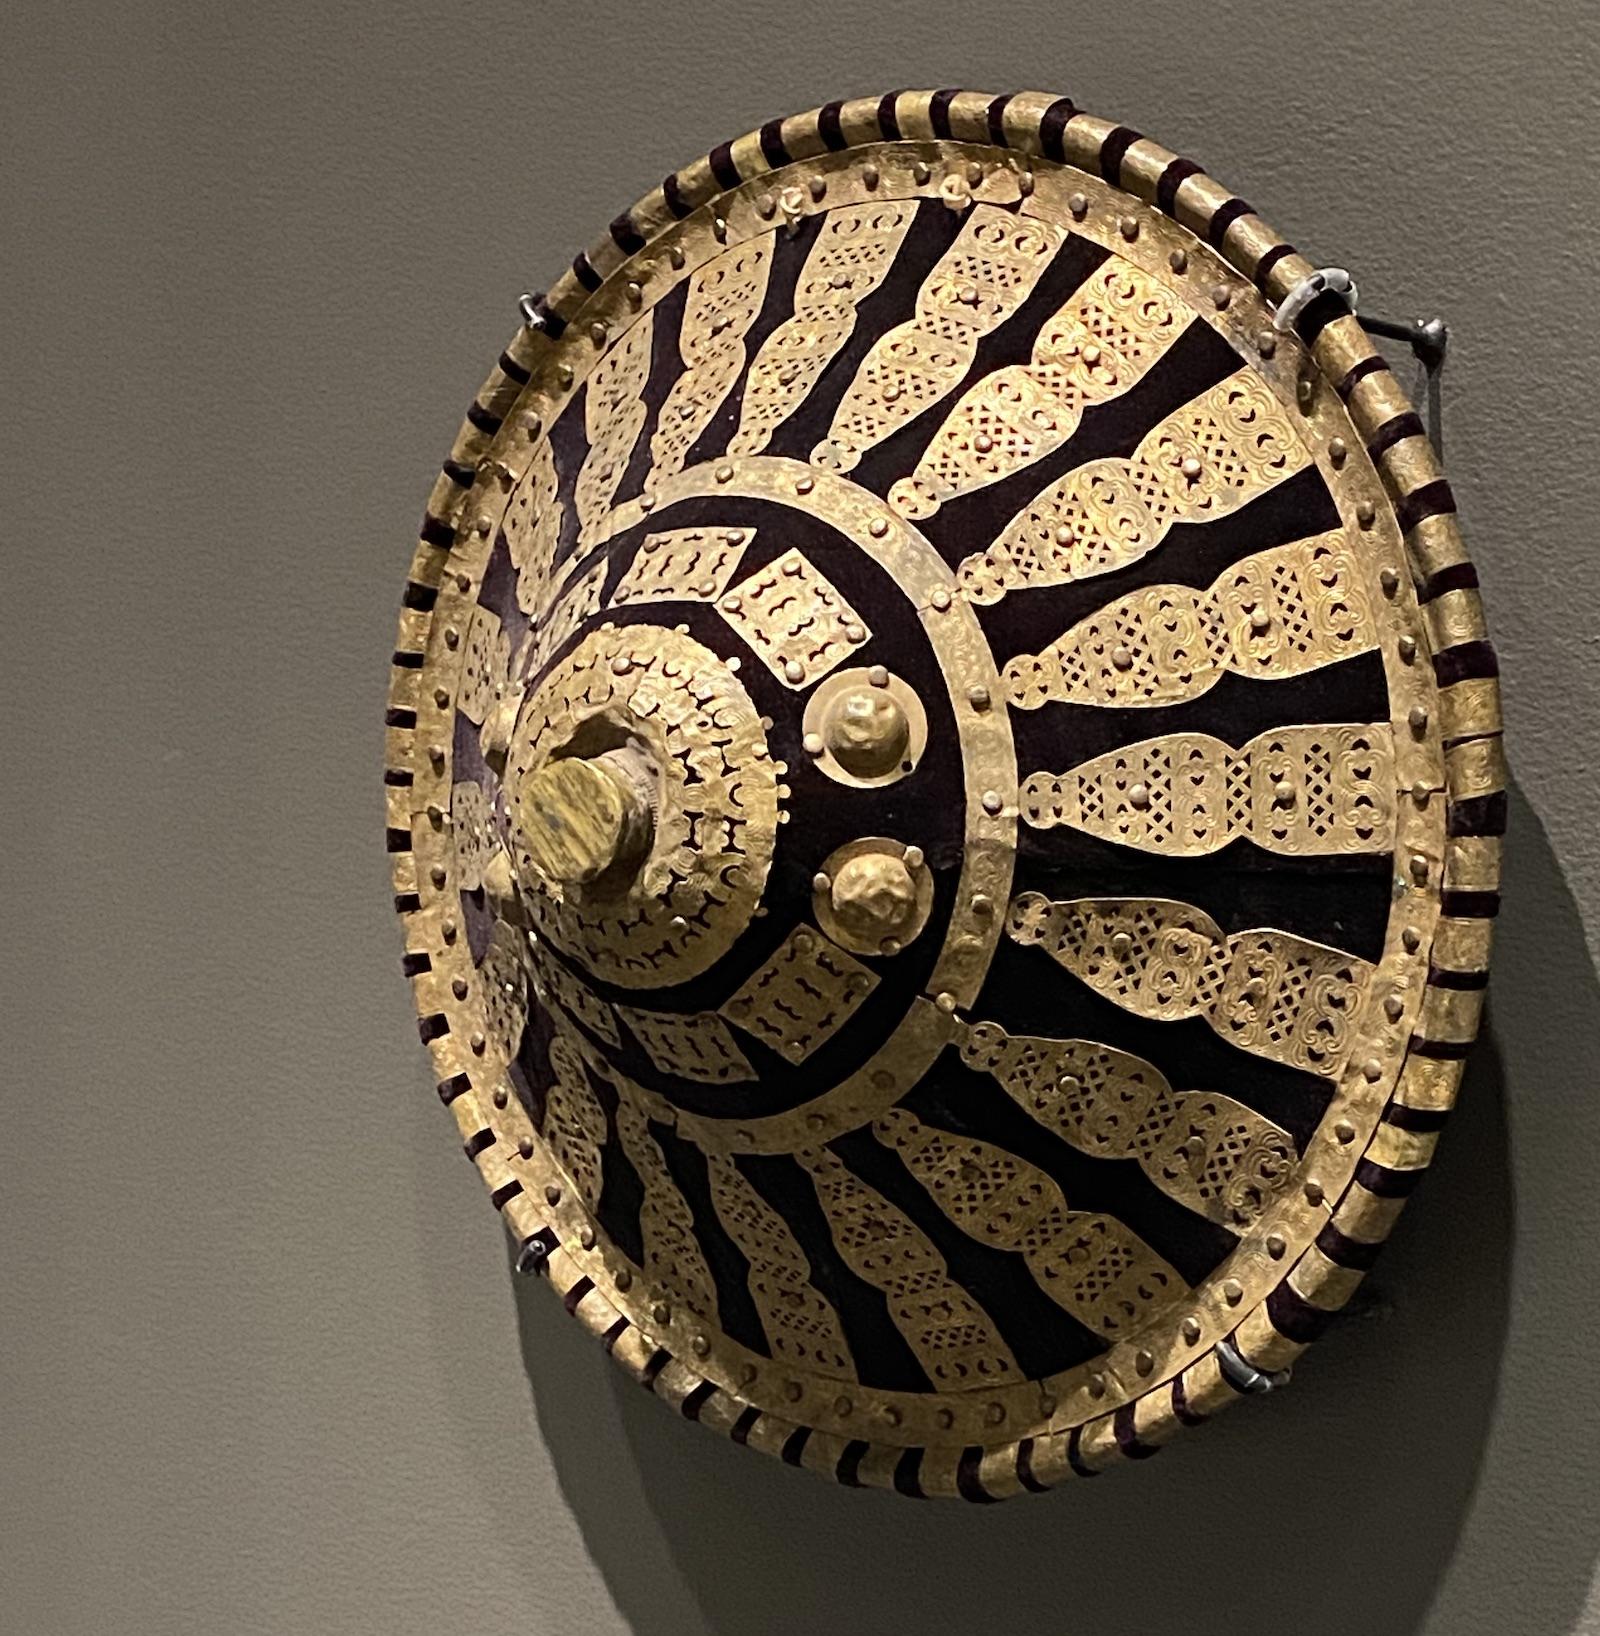 African Metalwork. Ethiopian artist, Ethiopia, Shield, 19th - 20th century. Brass, cloth, and animal hide. Collection of Drs. John and Nicole Dintenfass. Photo by Nia Bowers.